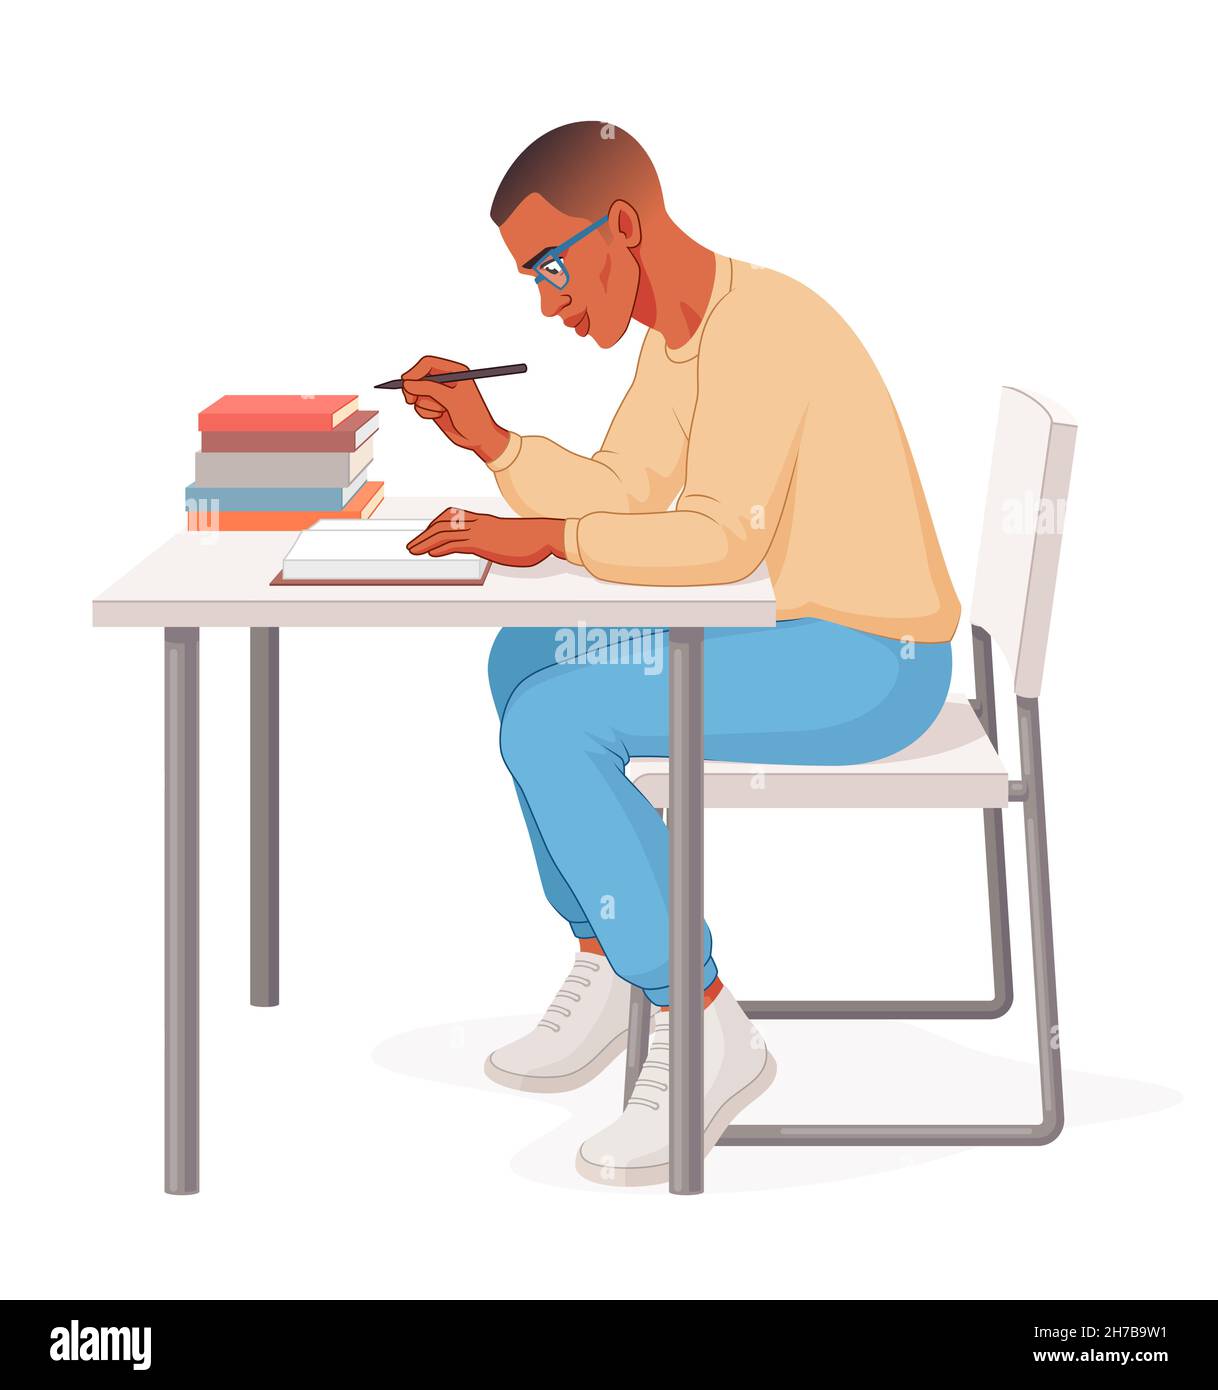 African American student sitting at desk reading a book. Young man studying preparing for exams. Vector illustration. Stock Vector